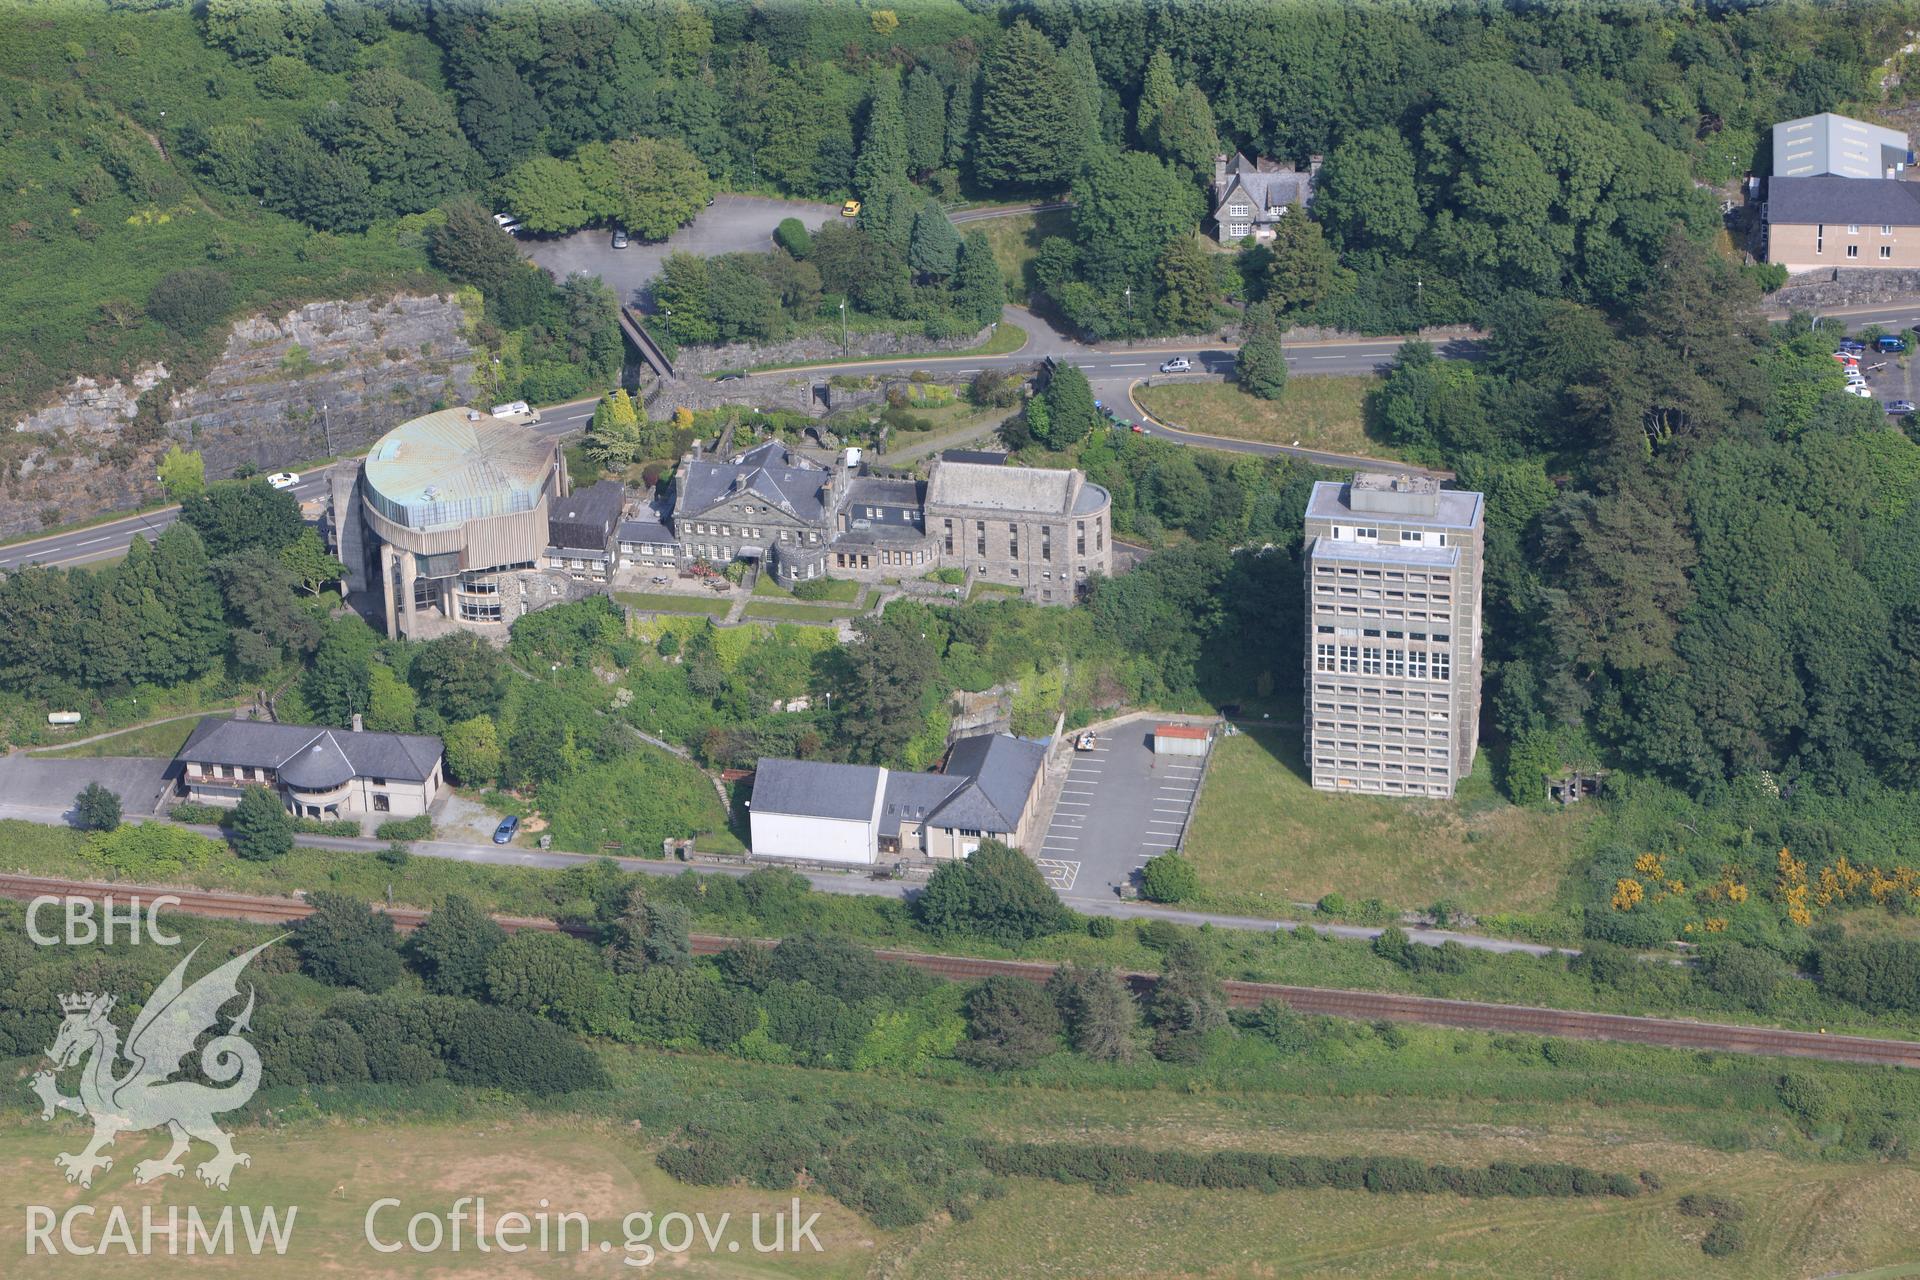 Theatr Ardudwy, Plas Wernfawr and the accommodation tower, all at Coleg Harlech, Ffordd Newydd, Harlech. Oblique aerial photograph taken during the Royal Commission?s programme of archaeological aerial reconnaissance by Toby Driver on 12th July 2013.